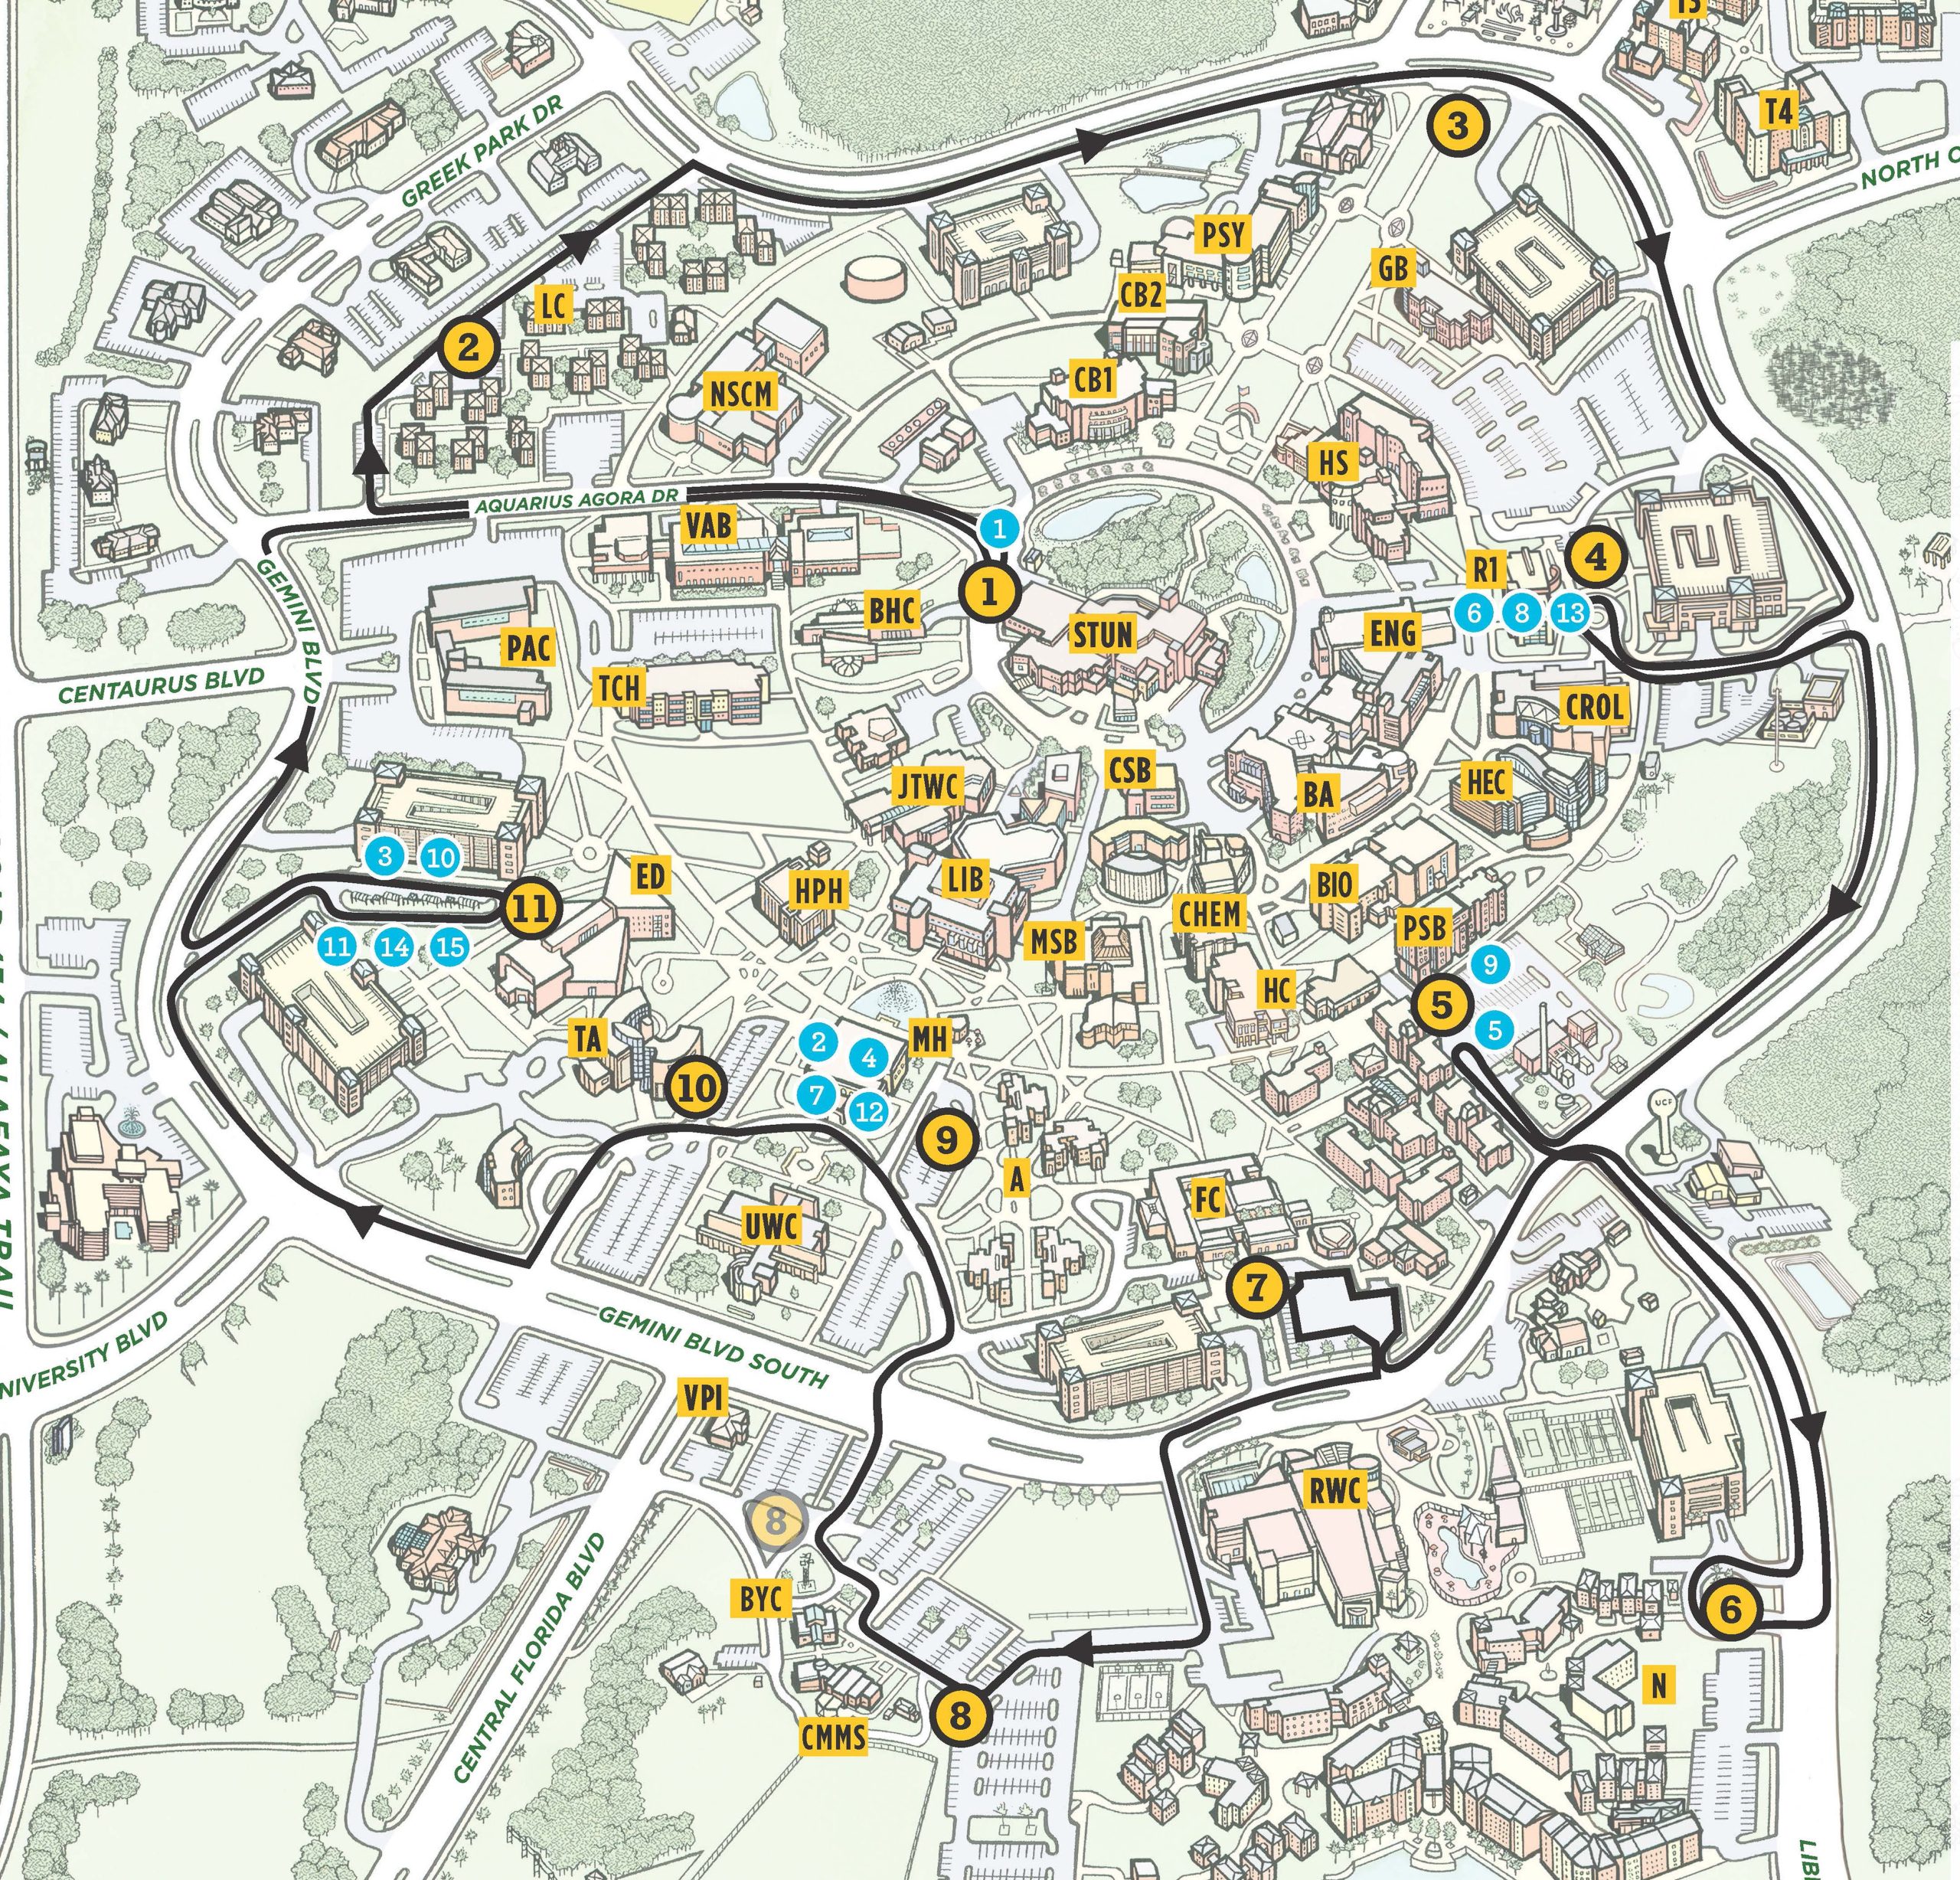 Intra Campus UCF Parking Services